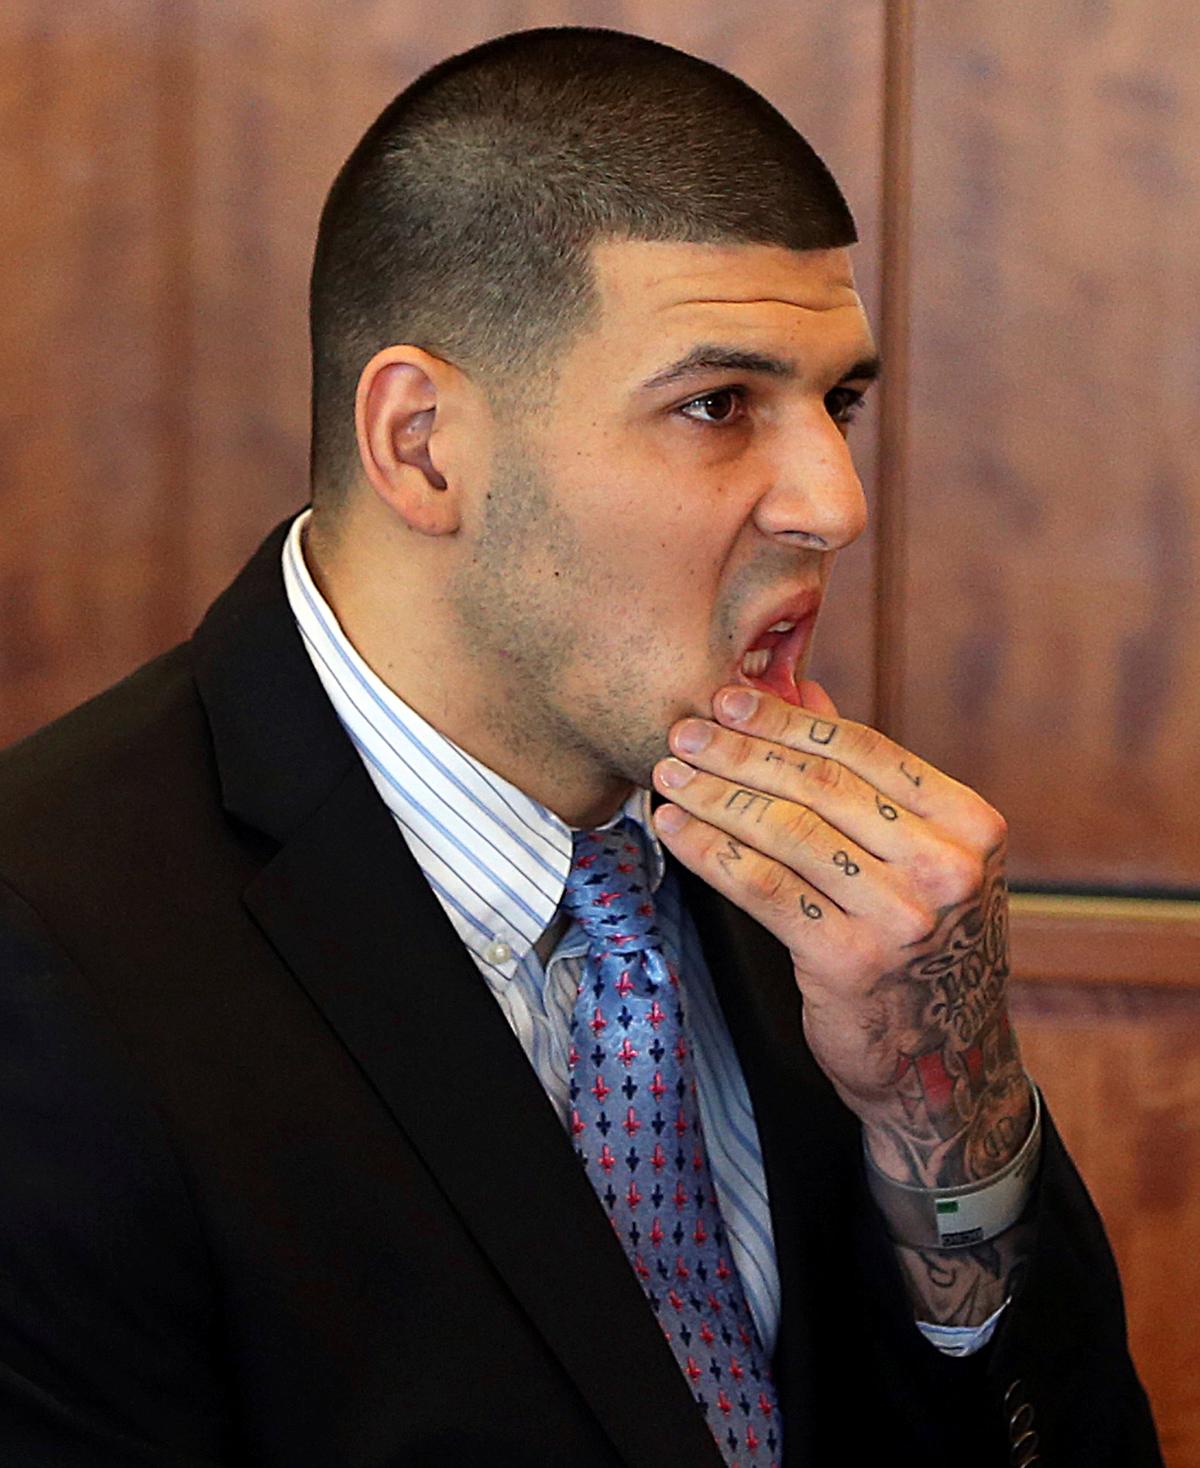 Aaron Hernandez appears for a pre-trial hearing at Bristol County Superior Court in Fall River, Massachusetts on Feb. 7, 2014. (REUTERS/Jonathan Wiggs/Boston Globe/Pool)